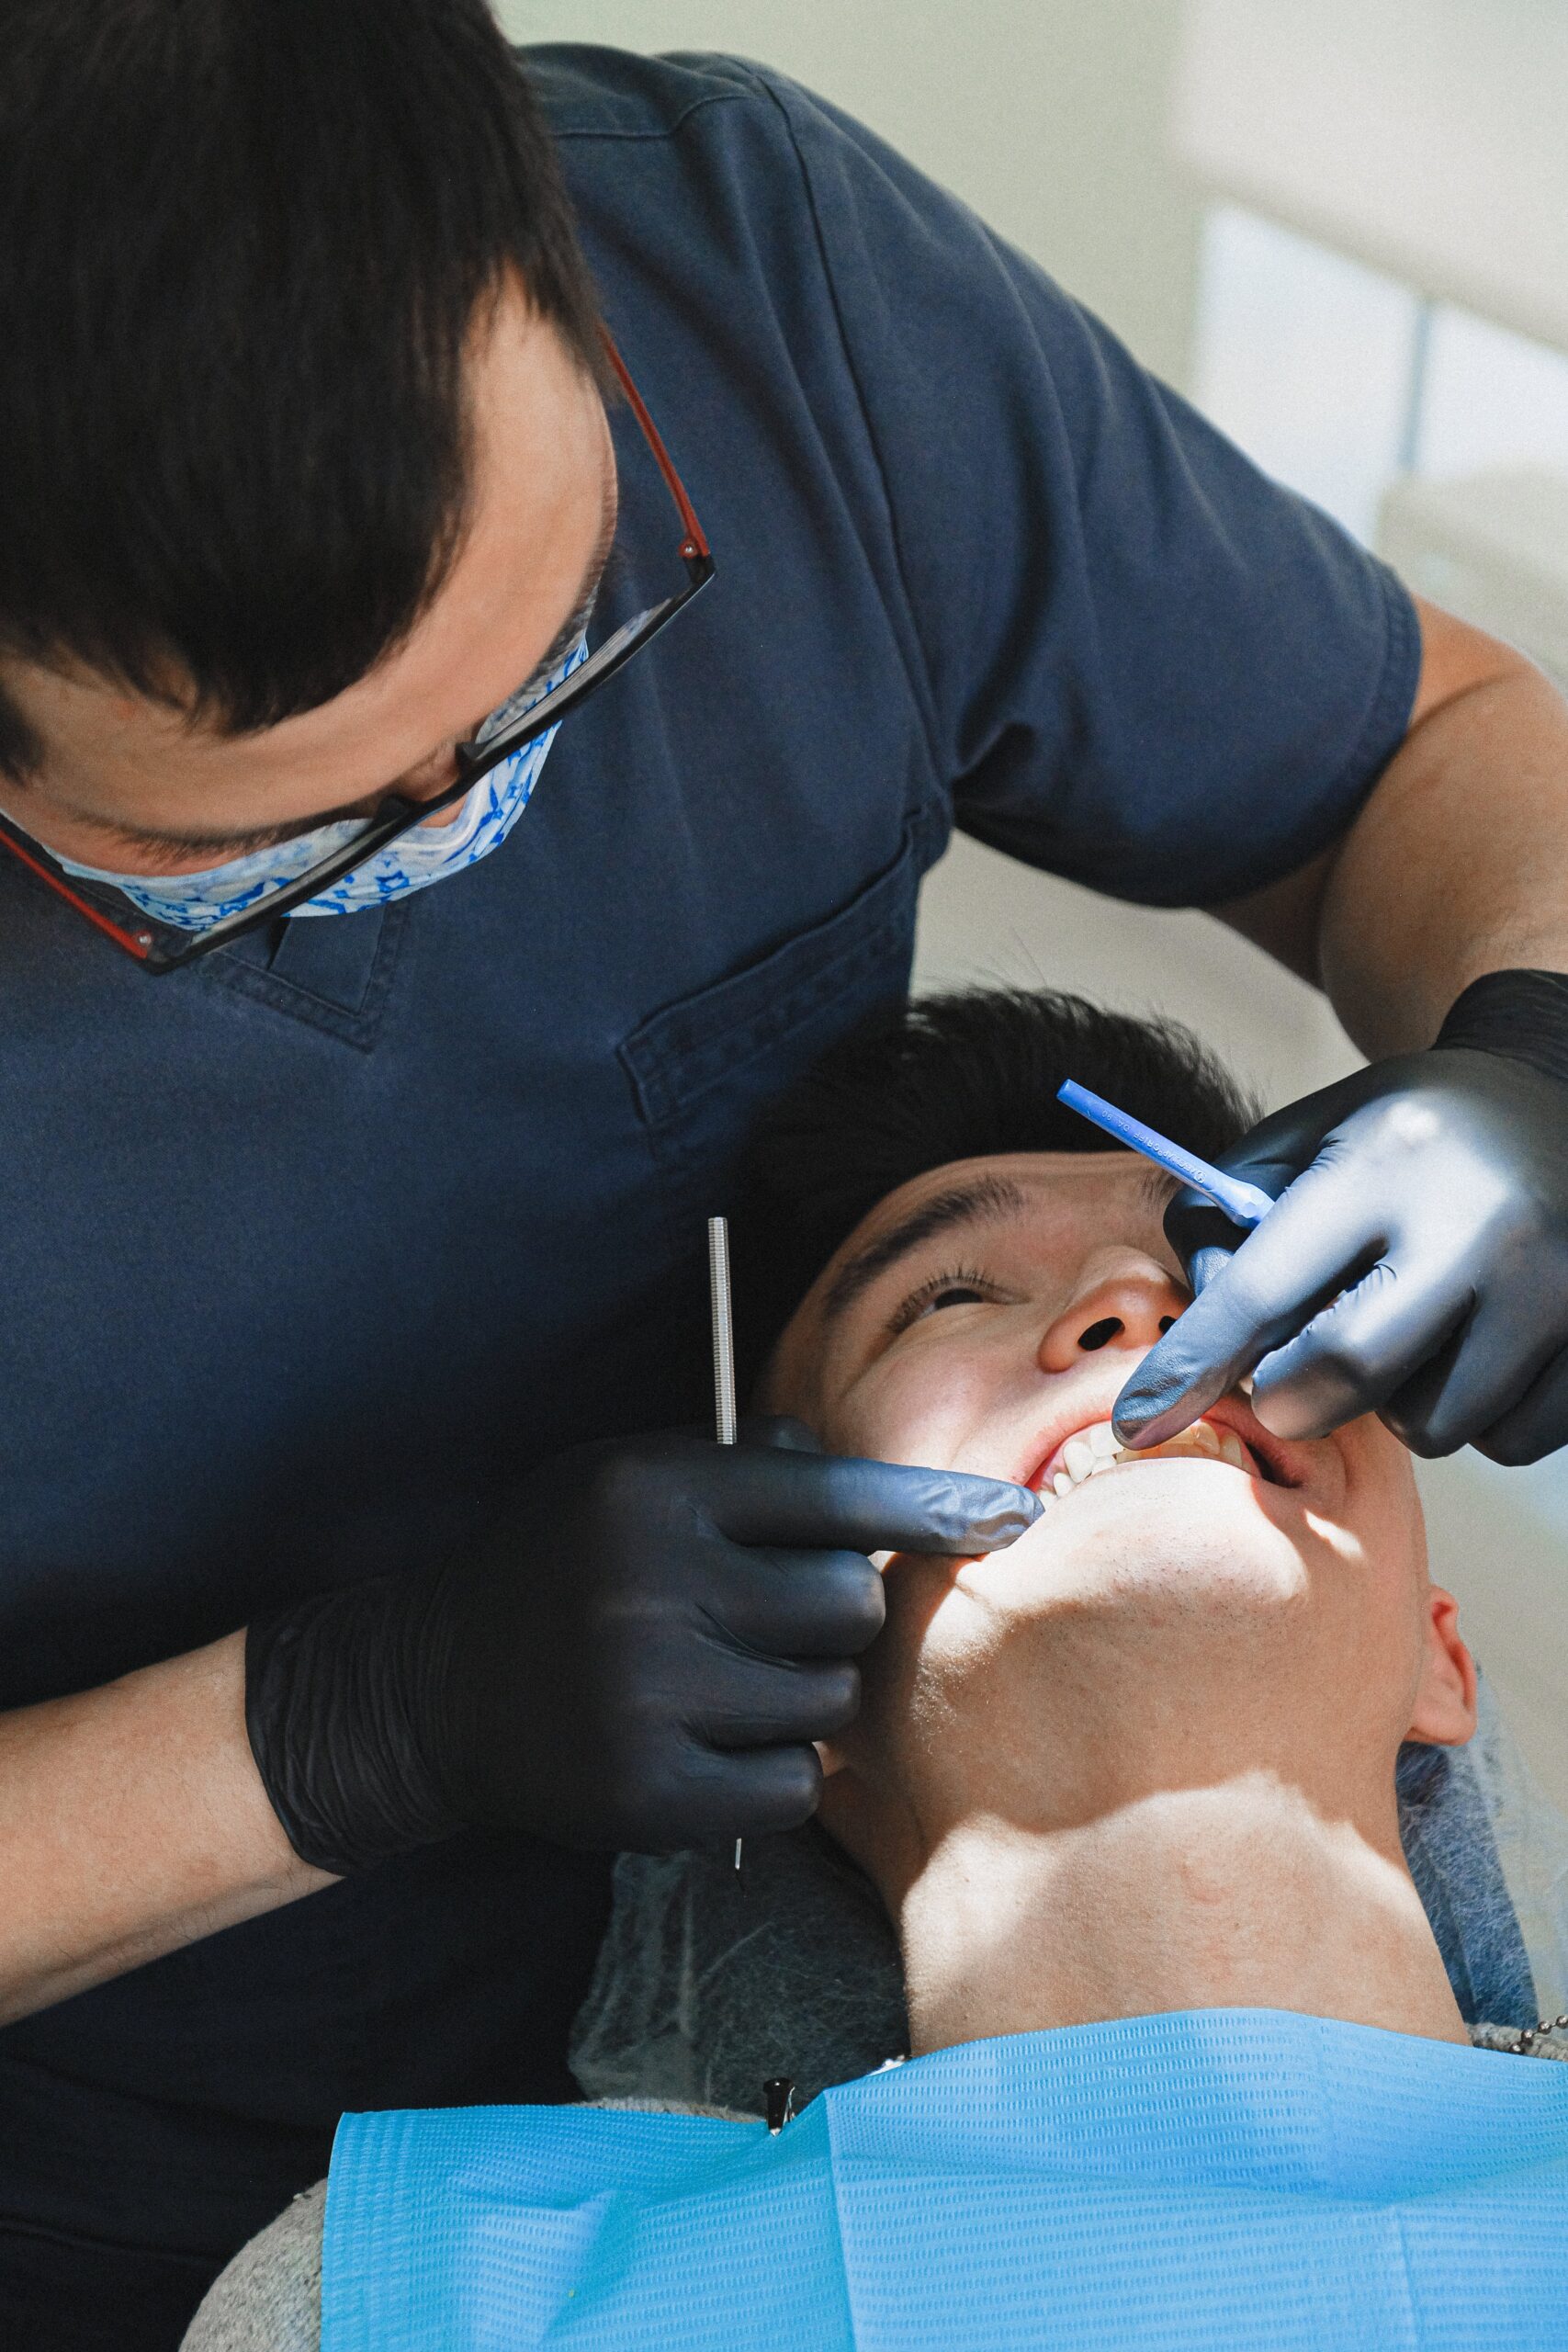 A dentist is treating a patient's teeth while the patient lies in a dental chair.